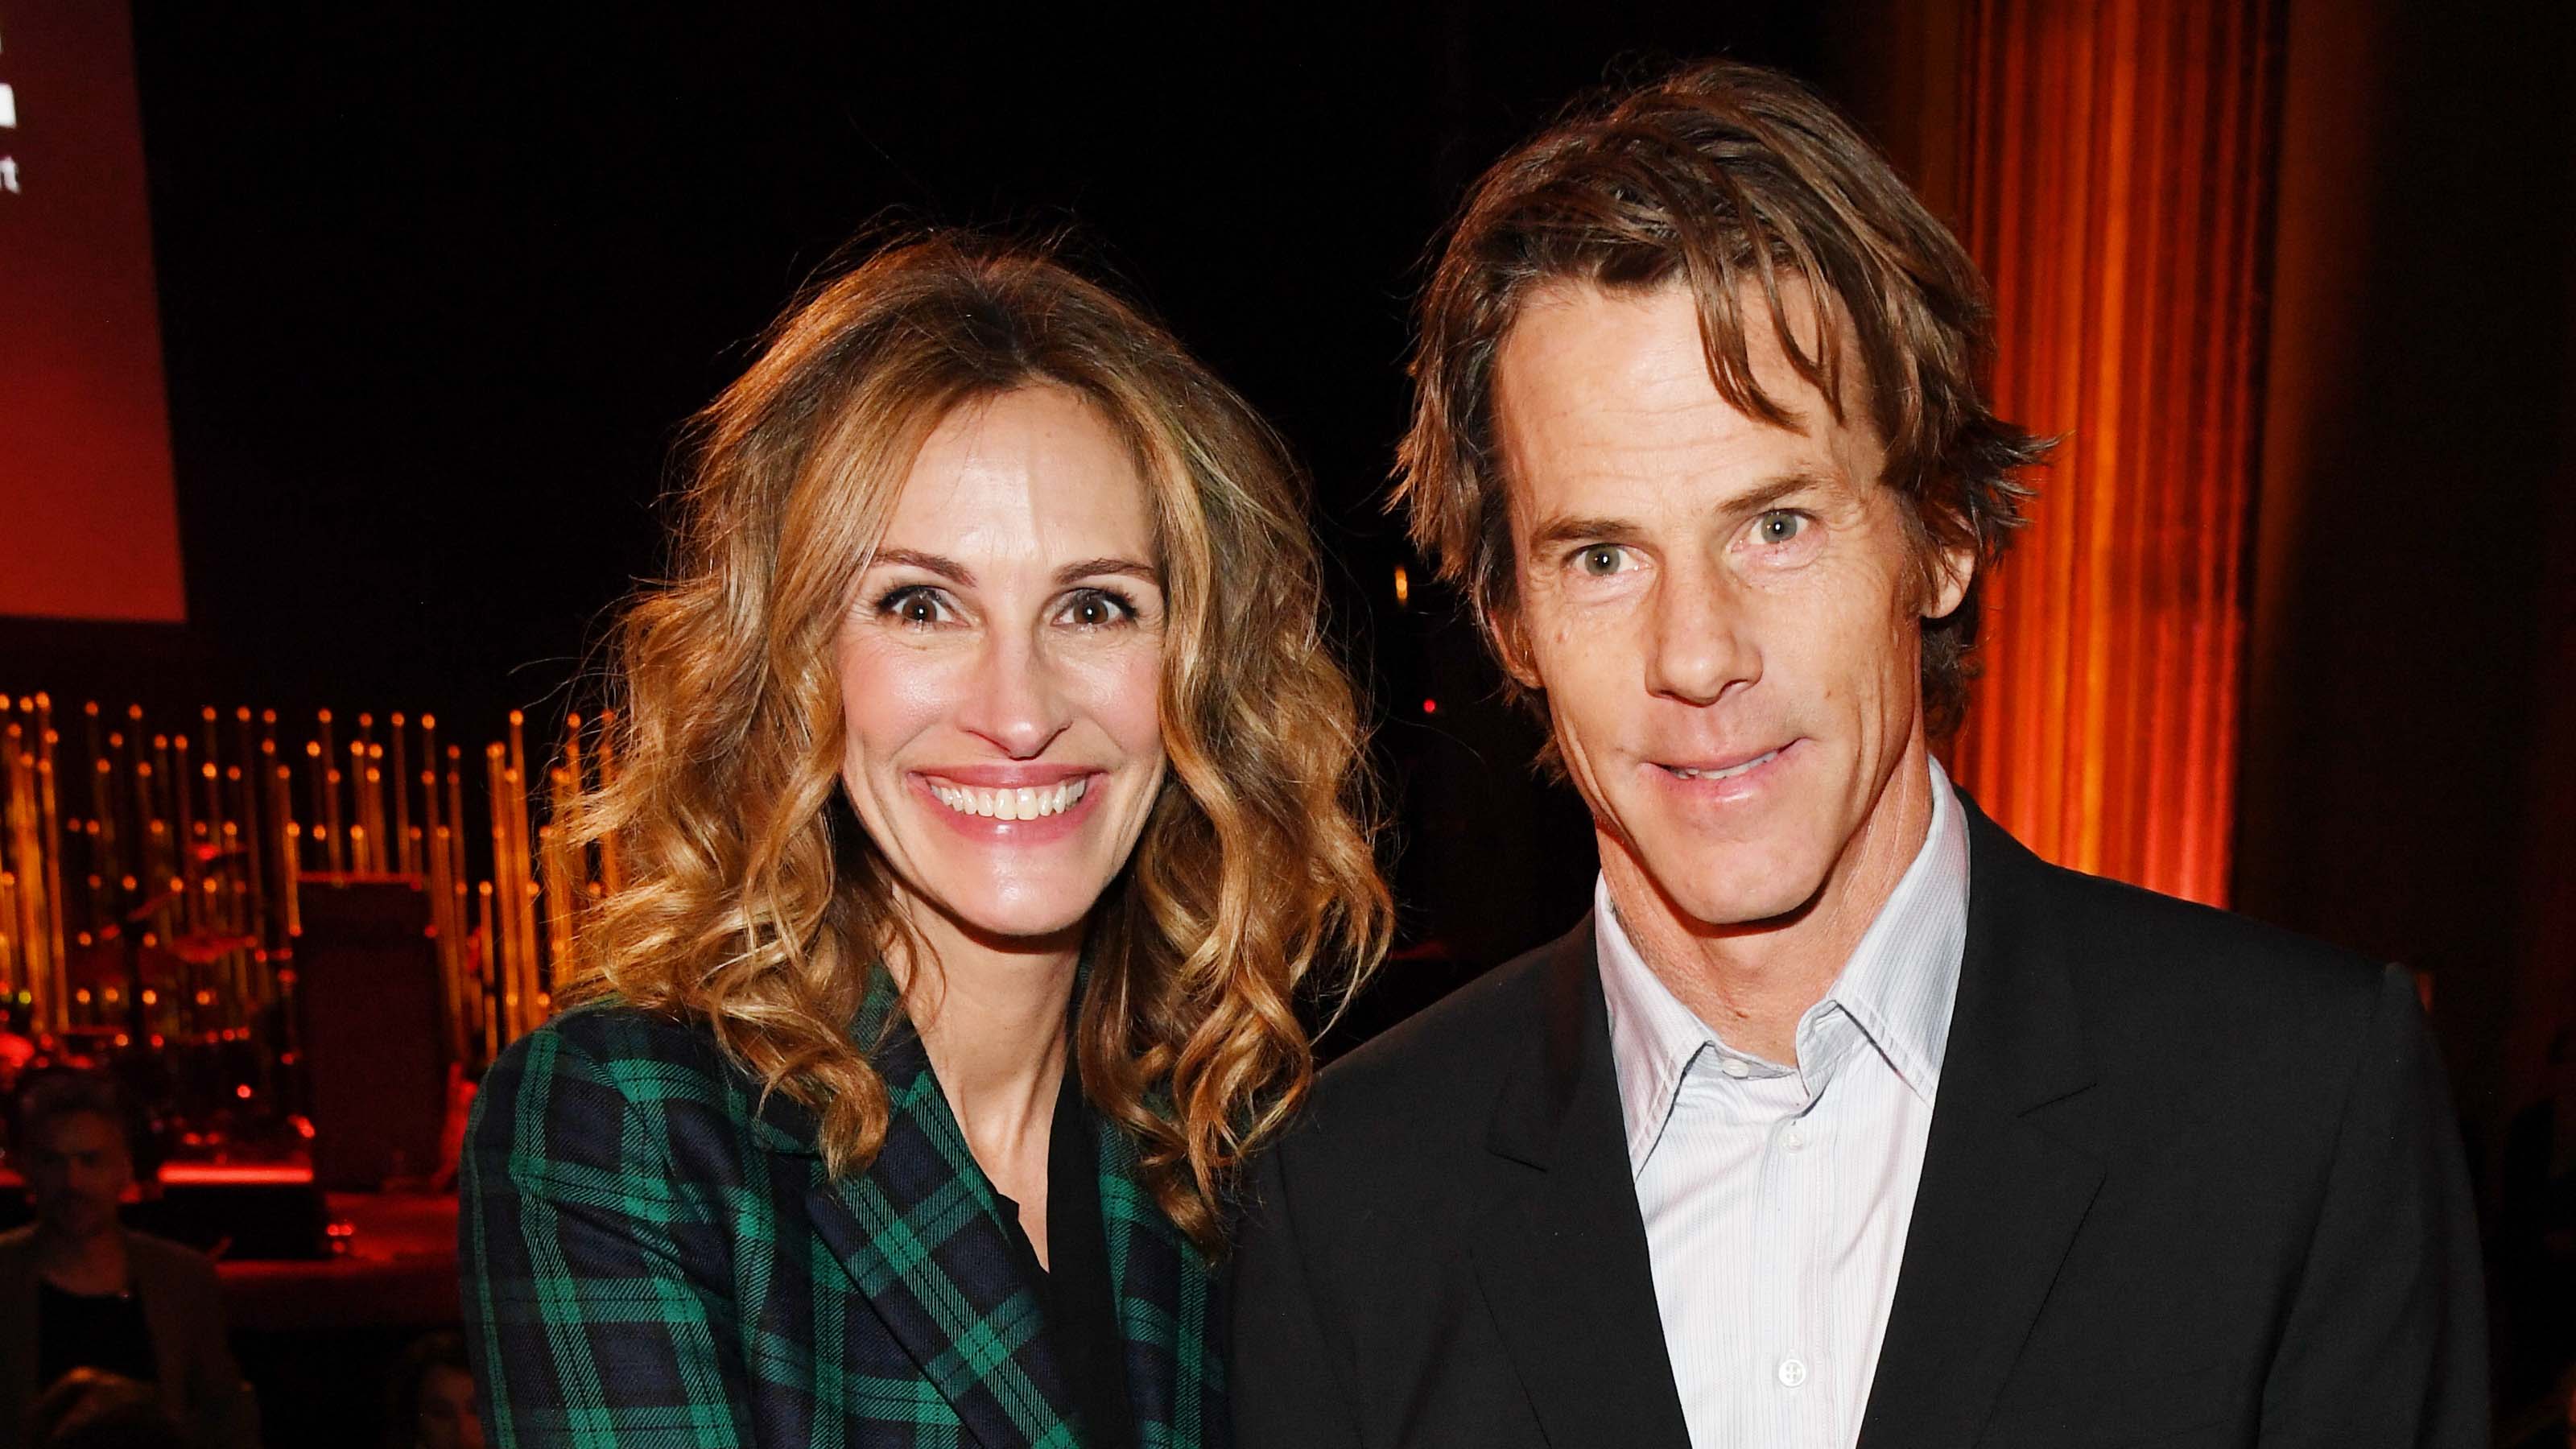 Julia Roberts shares photo in honor of Danny Moder wedding anniversary